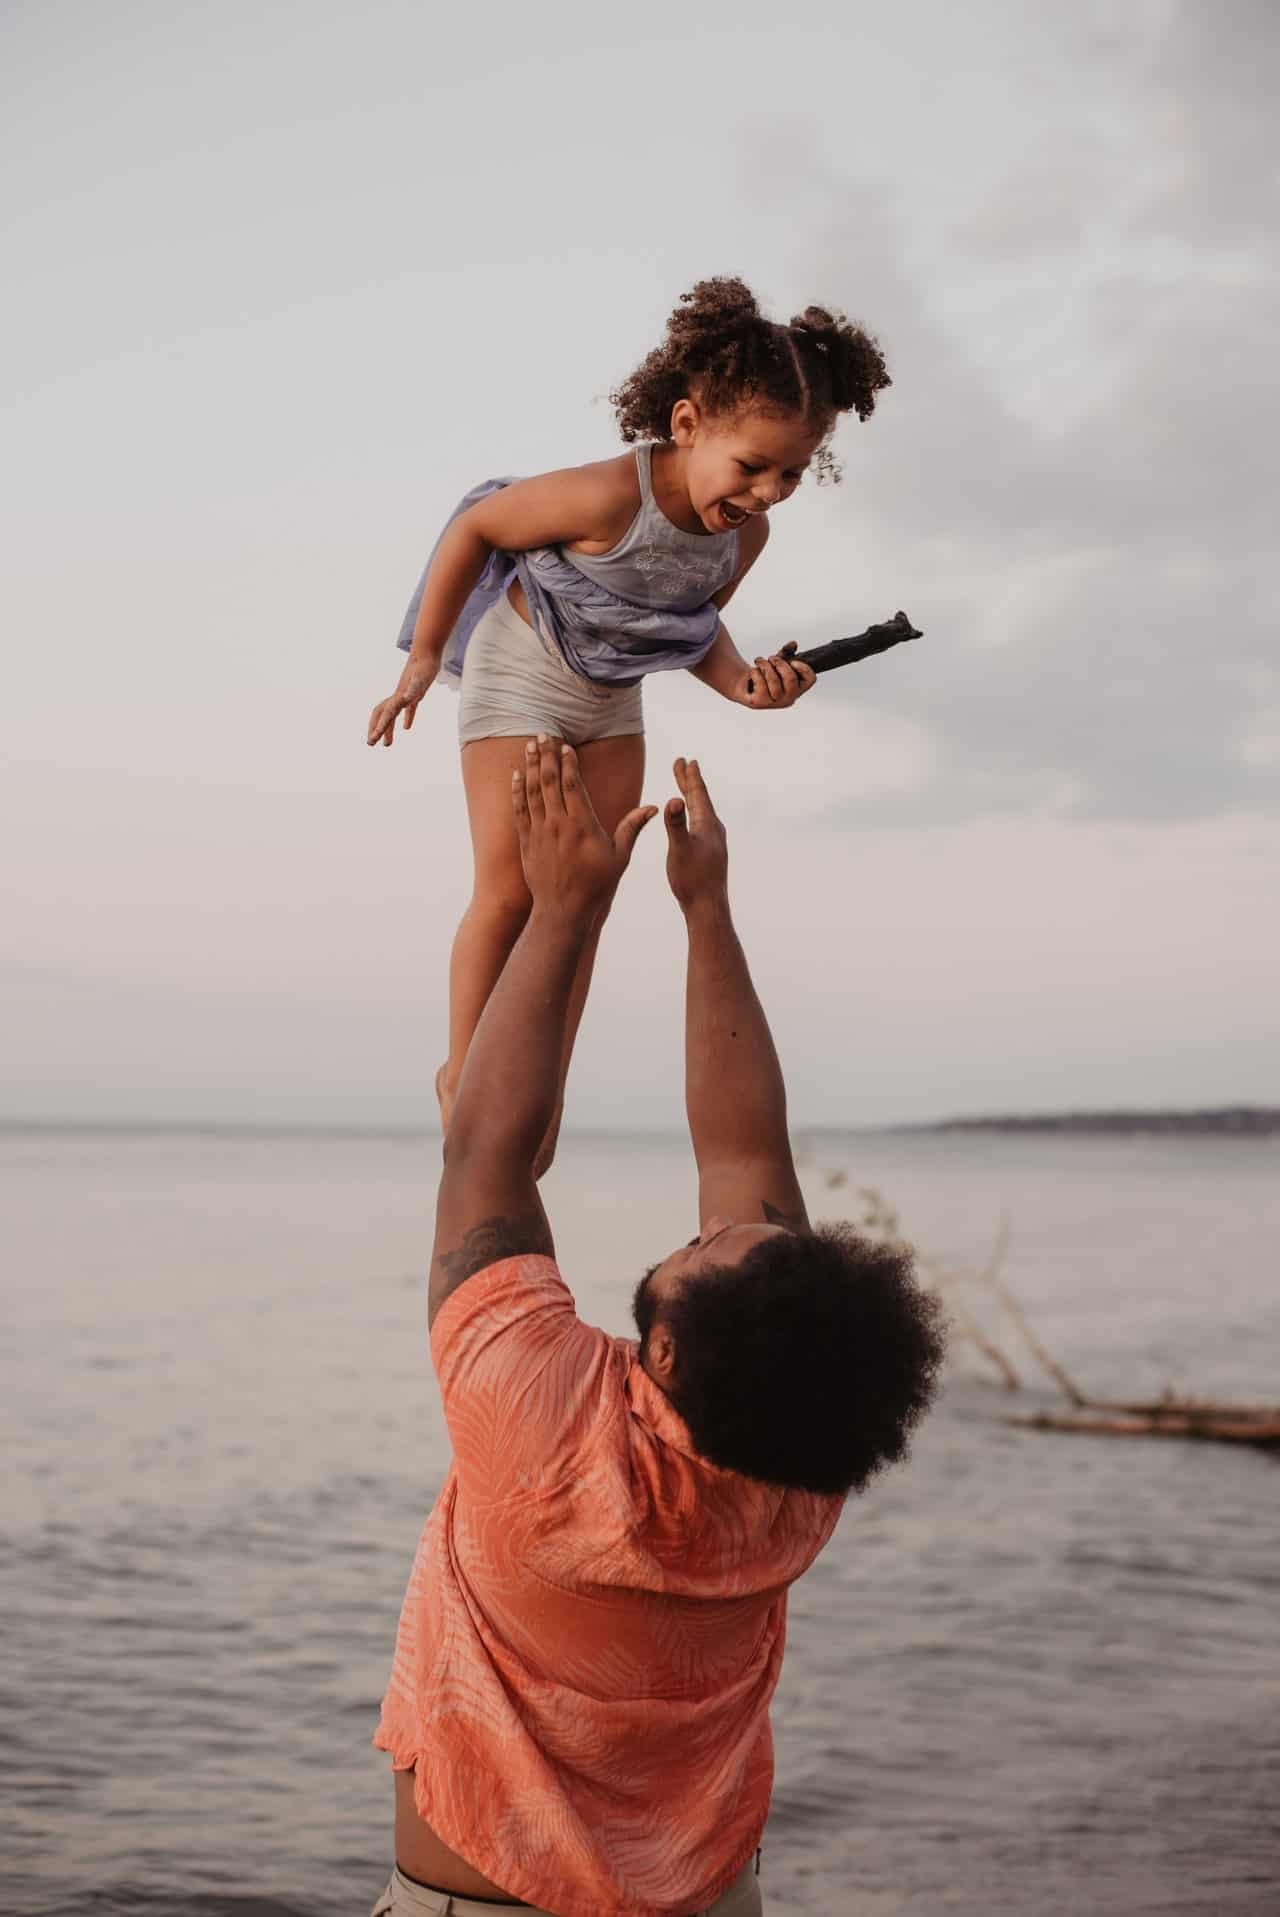 A father launches his daughter in the air with arms outstretched, ready to catch her. 